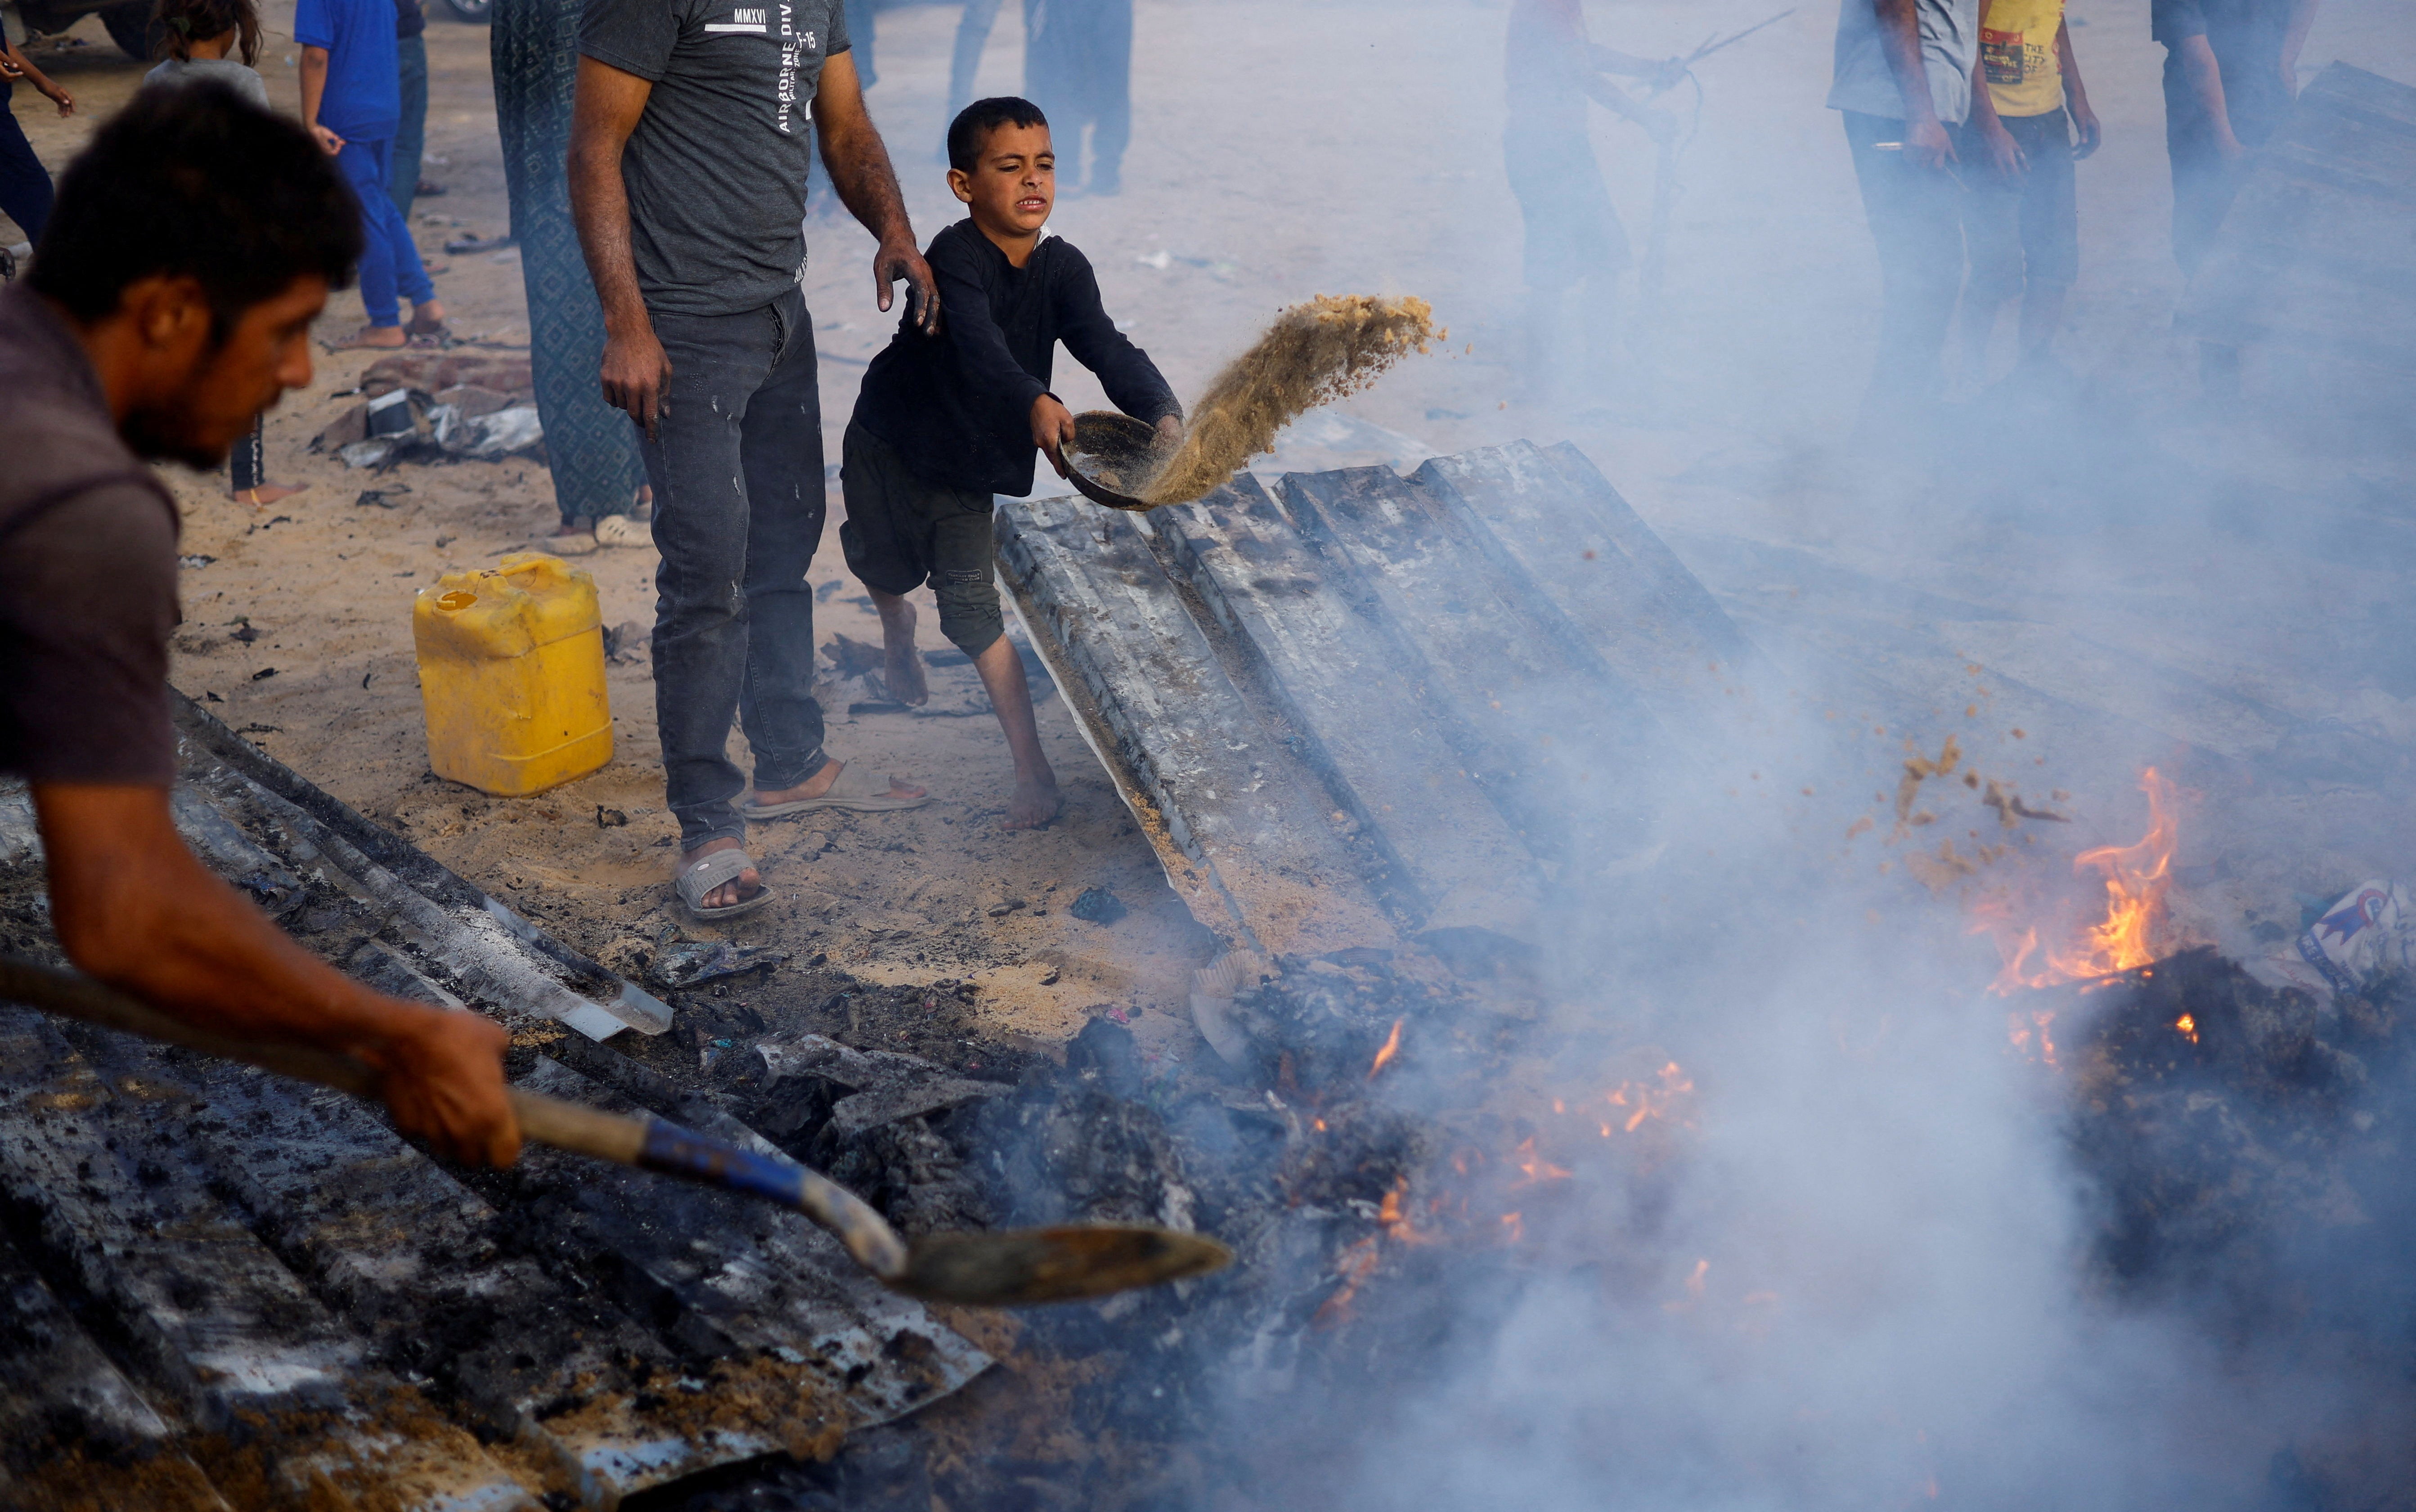 Palestinians put out a fire at the site of an Israeli airstrike on an area designated for displaced people in Rafah